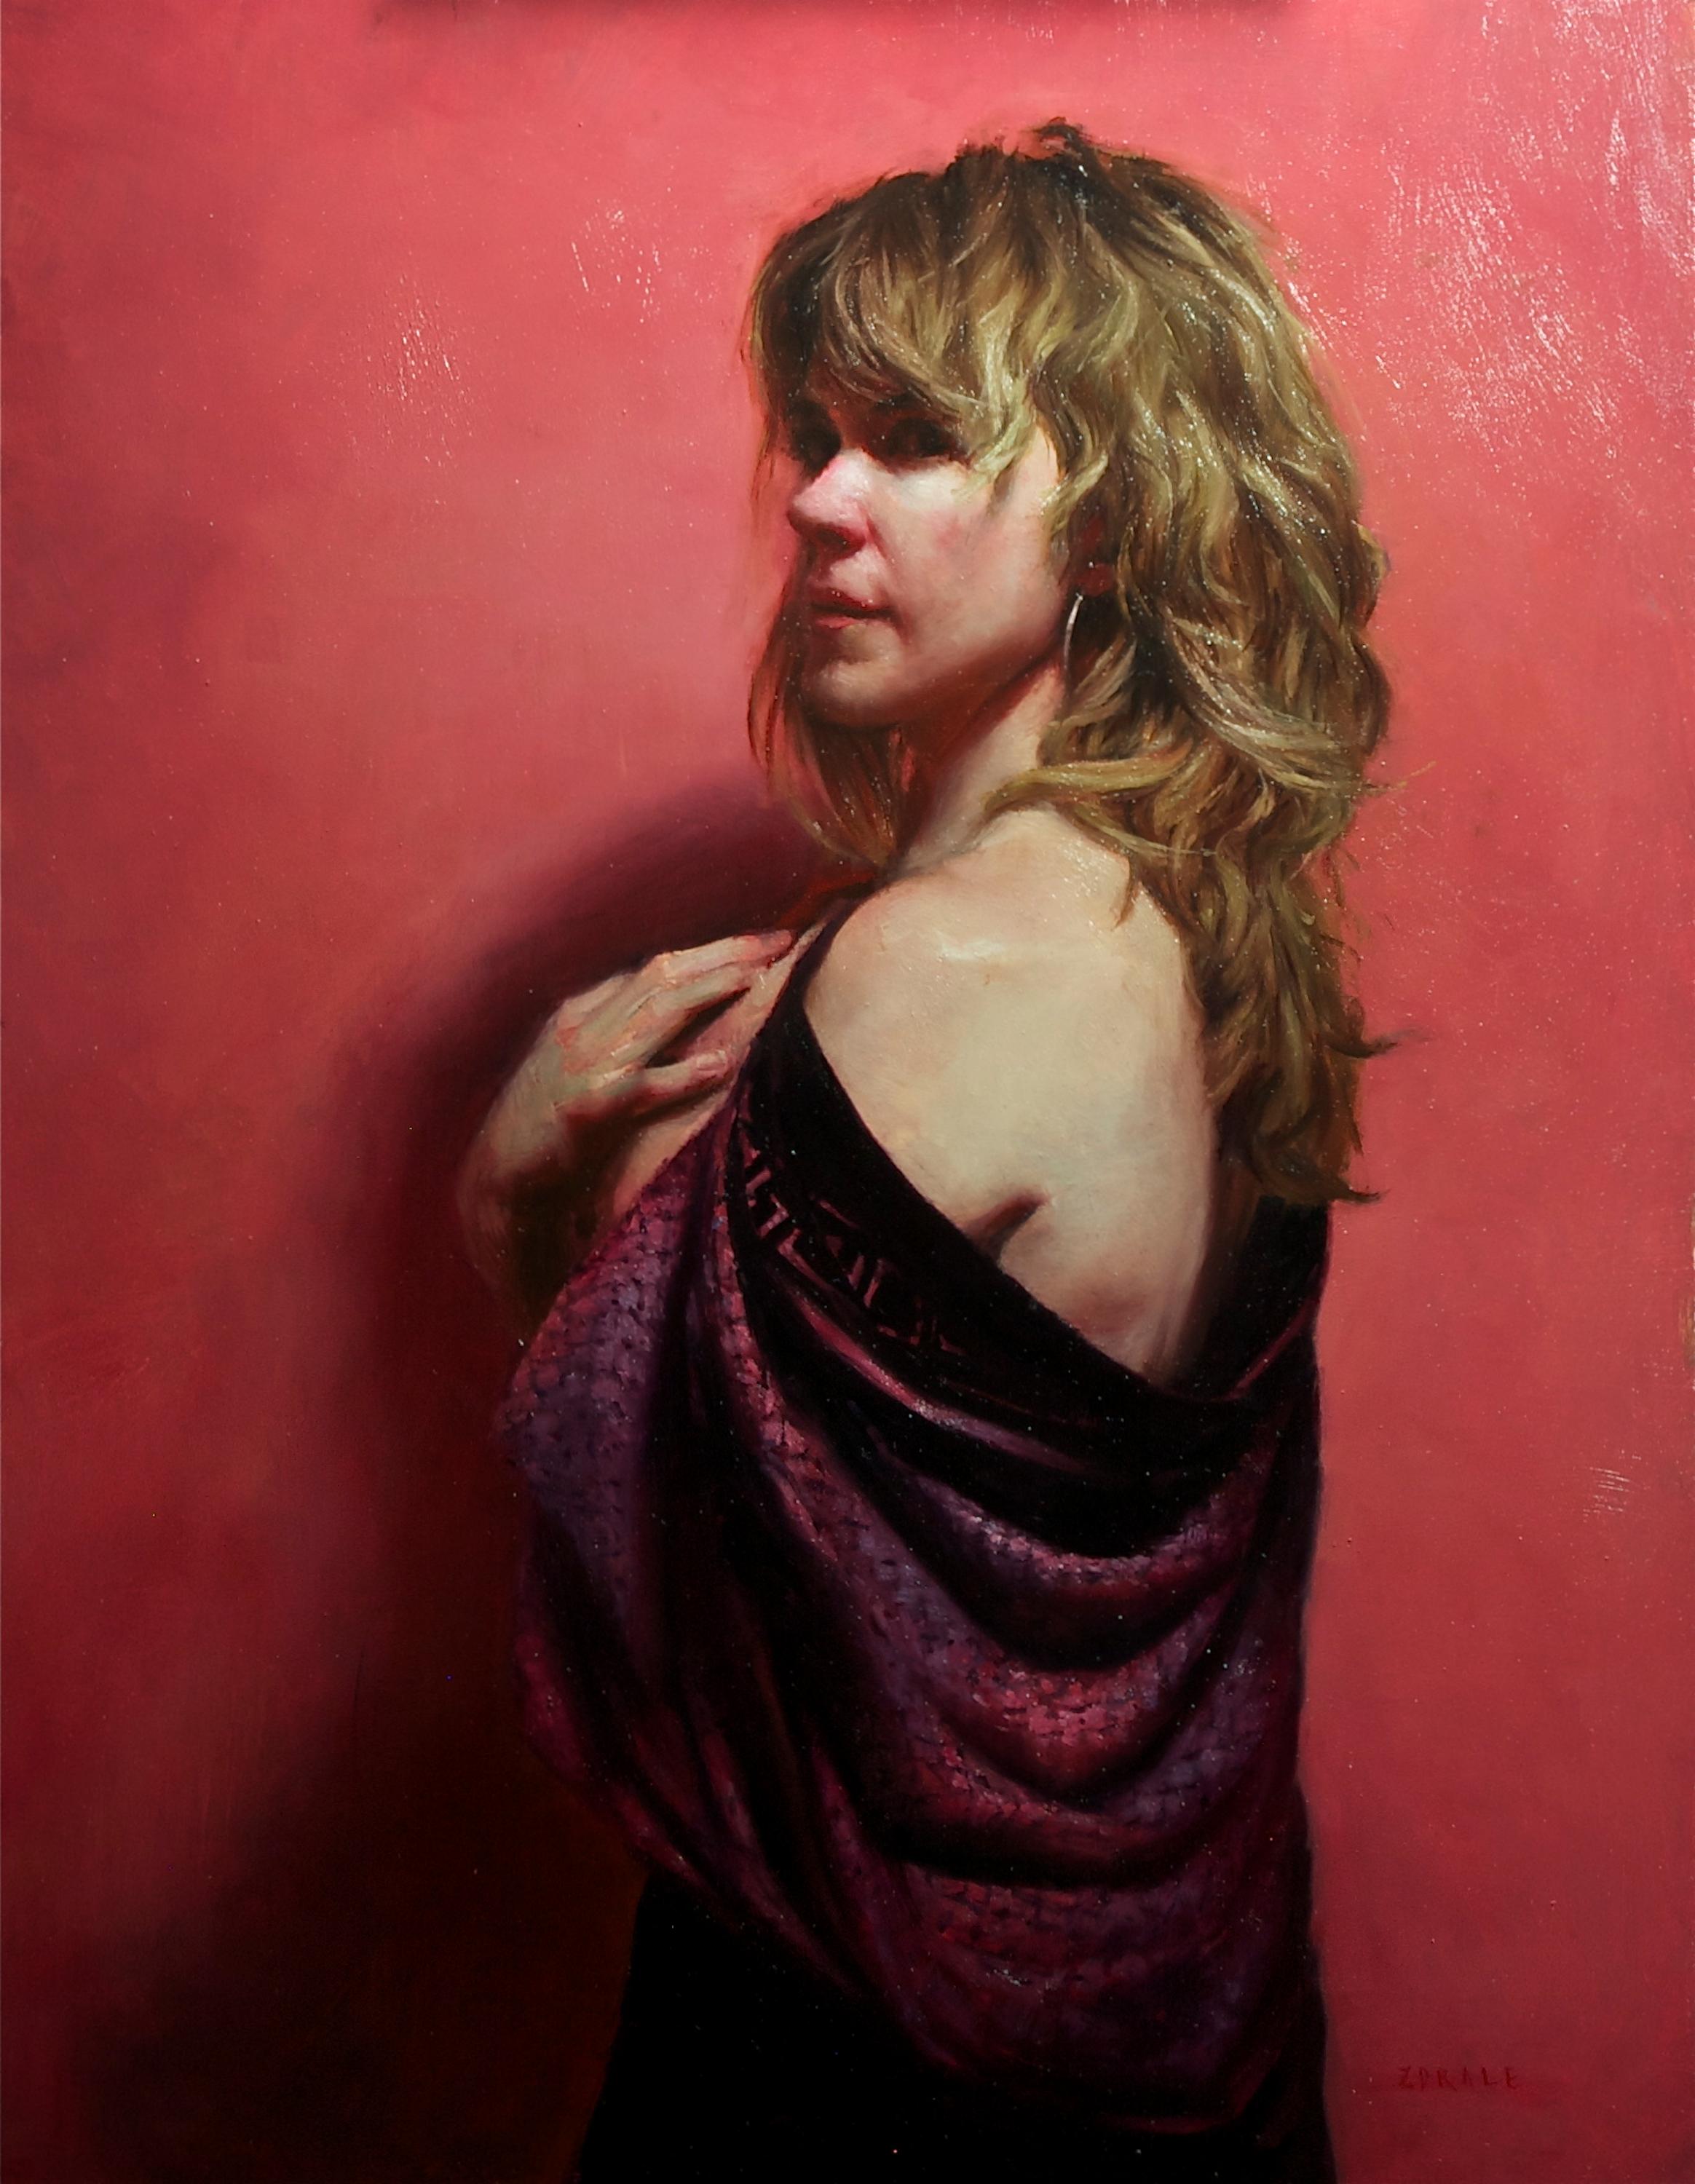 Pink Room - Female Figure Draped in Fabric, Original Oil Painting by Zack Zdrale